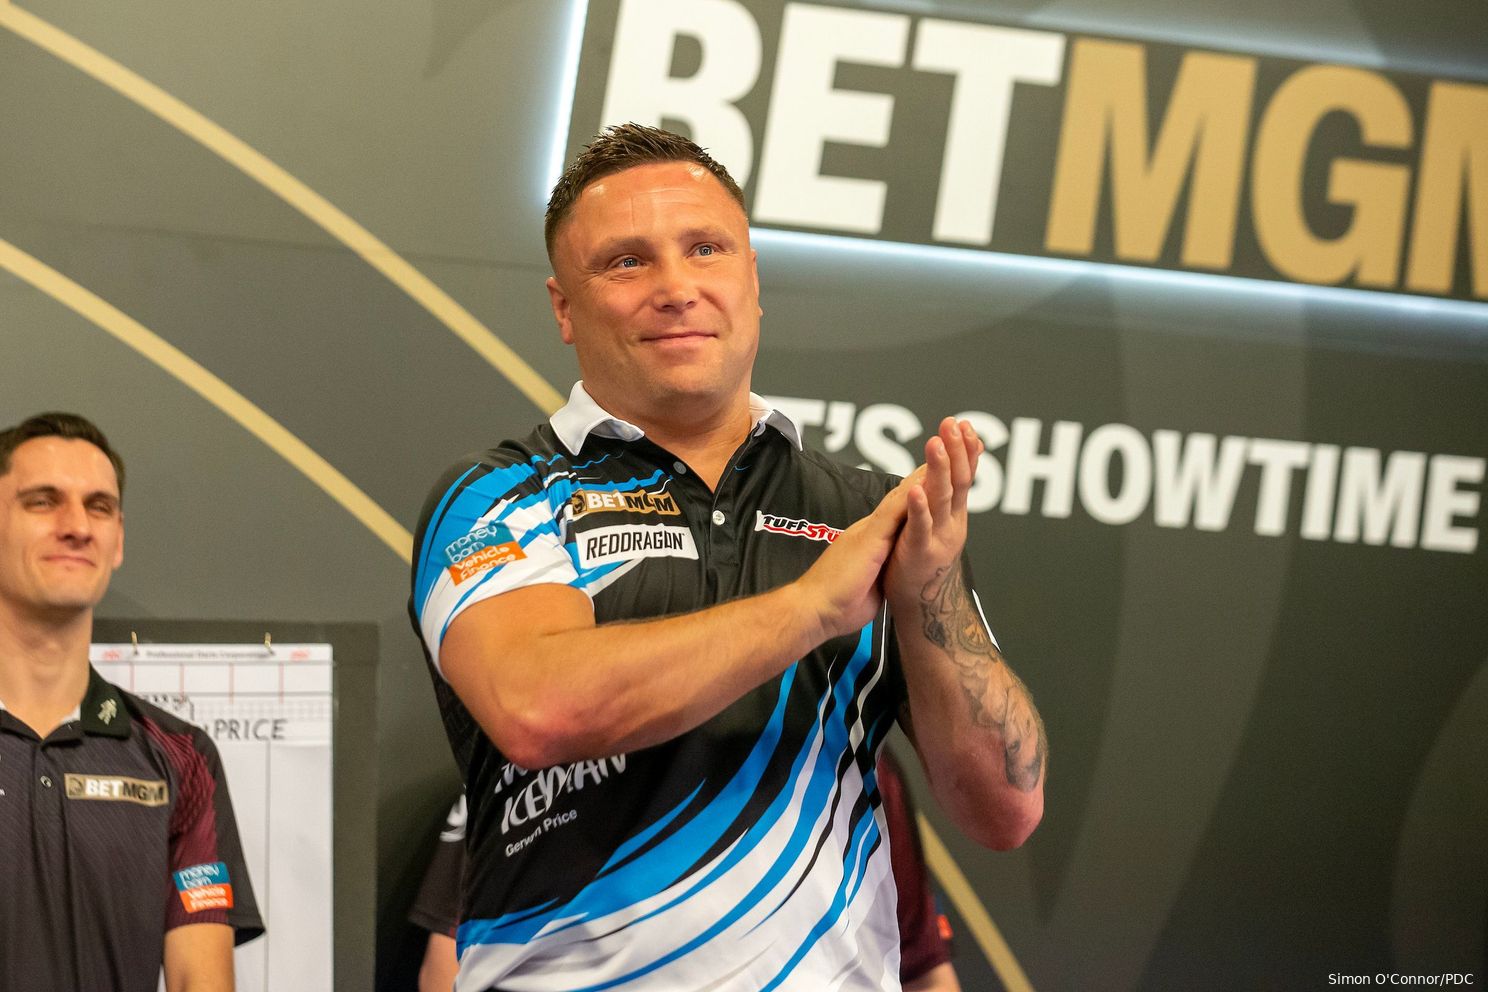 "Littler's not really doing much, he was rubbish in the ProTours": Gerwyn Price sees Luke Humphries as World Matchplay favourite in leading duo